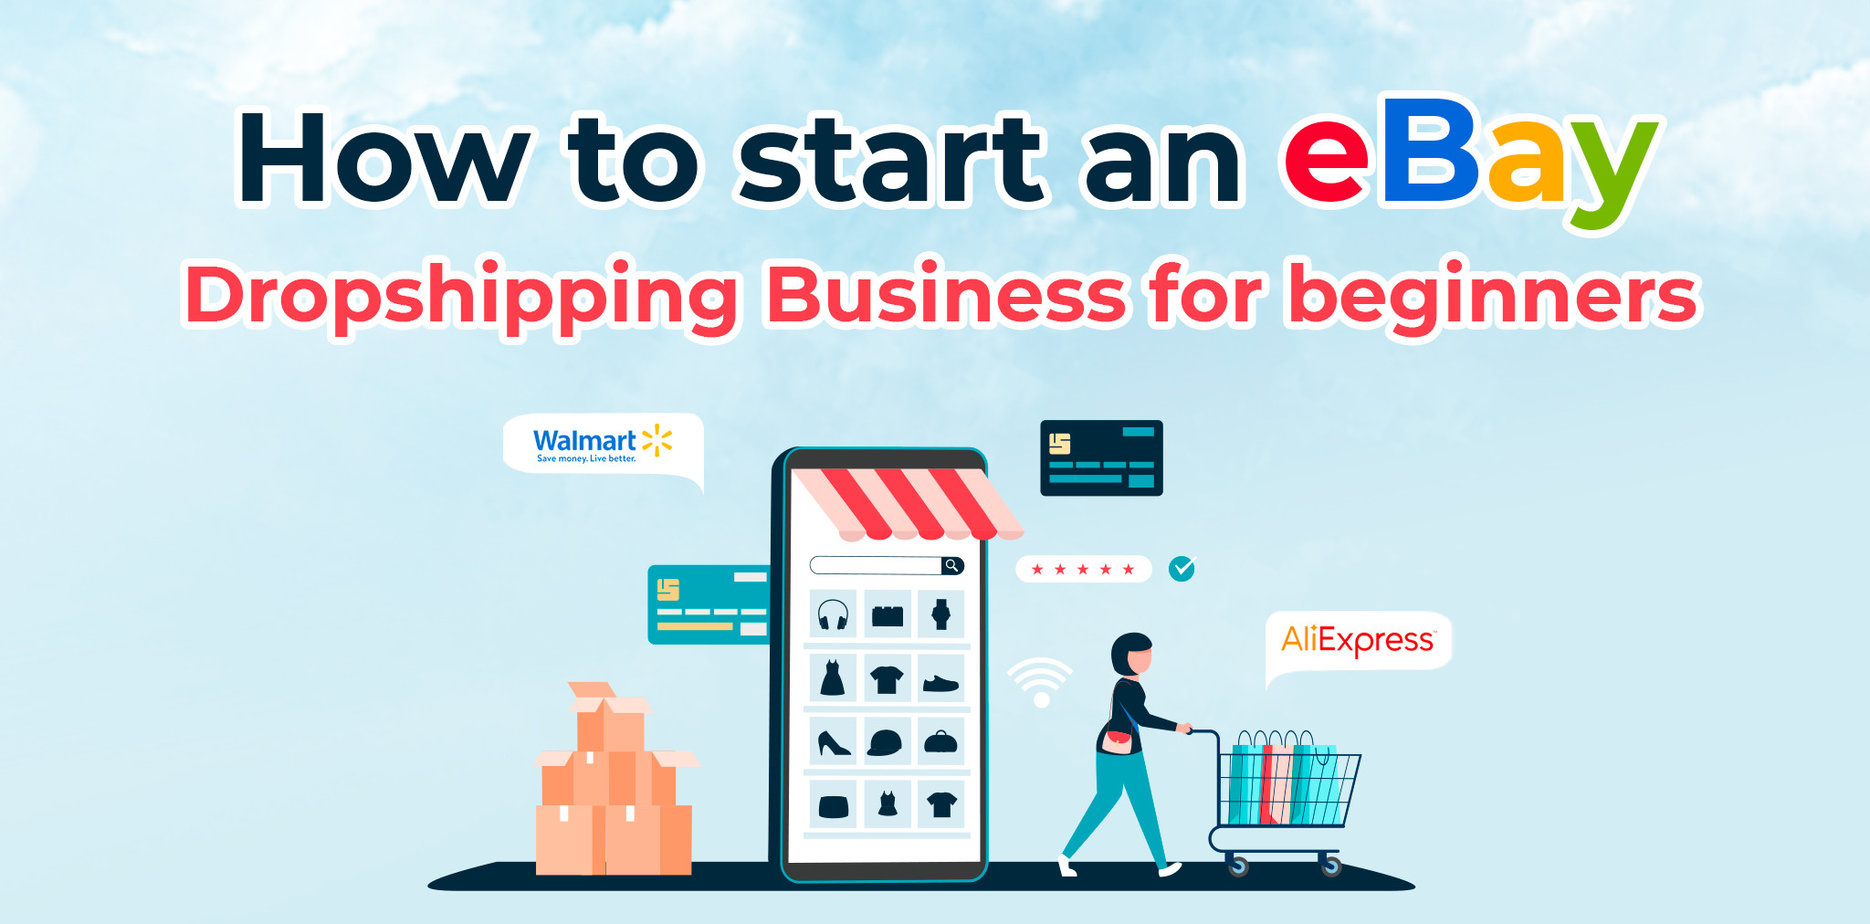 Wix Dropshipping From AliExpress - Beginner's Guide